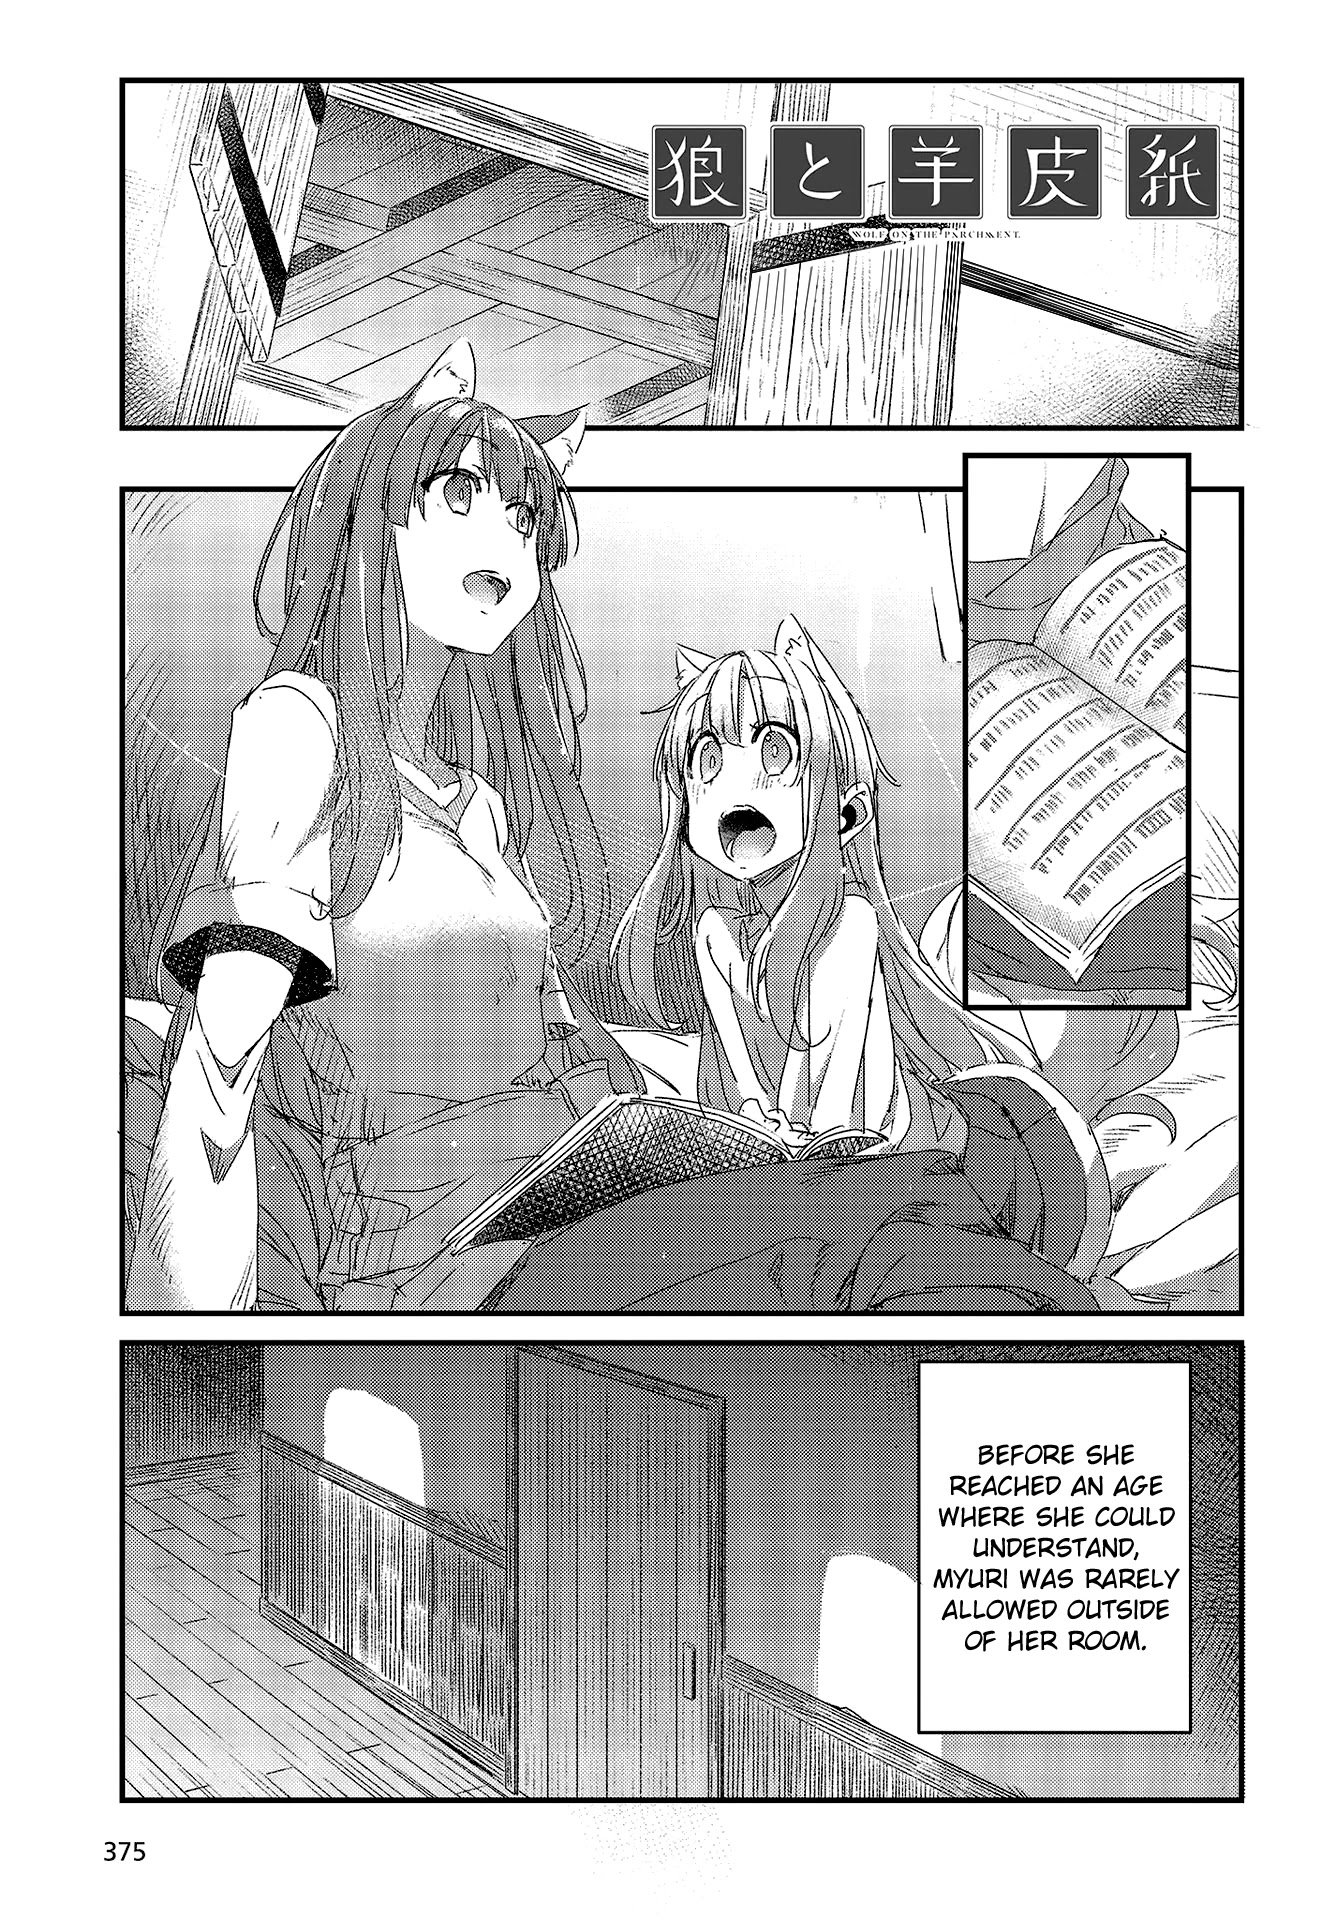 Wolf & Parchment: New Theory Spice & Wolf - Page 1